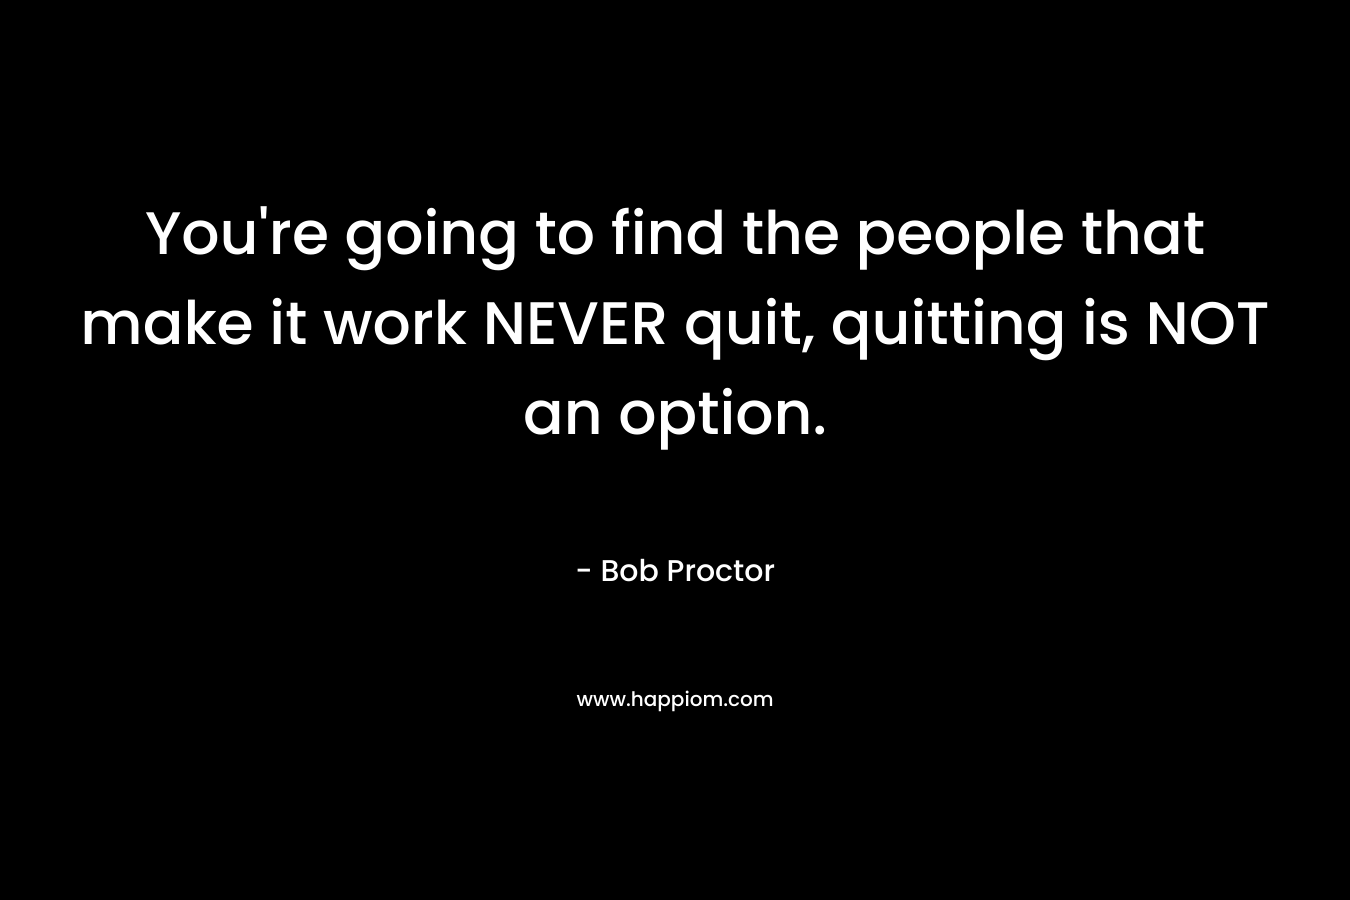 You’re going to find the people that make it work NEVER quit, quitting is NOT an option. – Bob Proctor